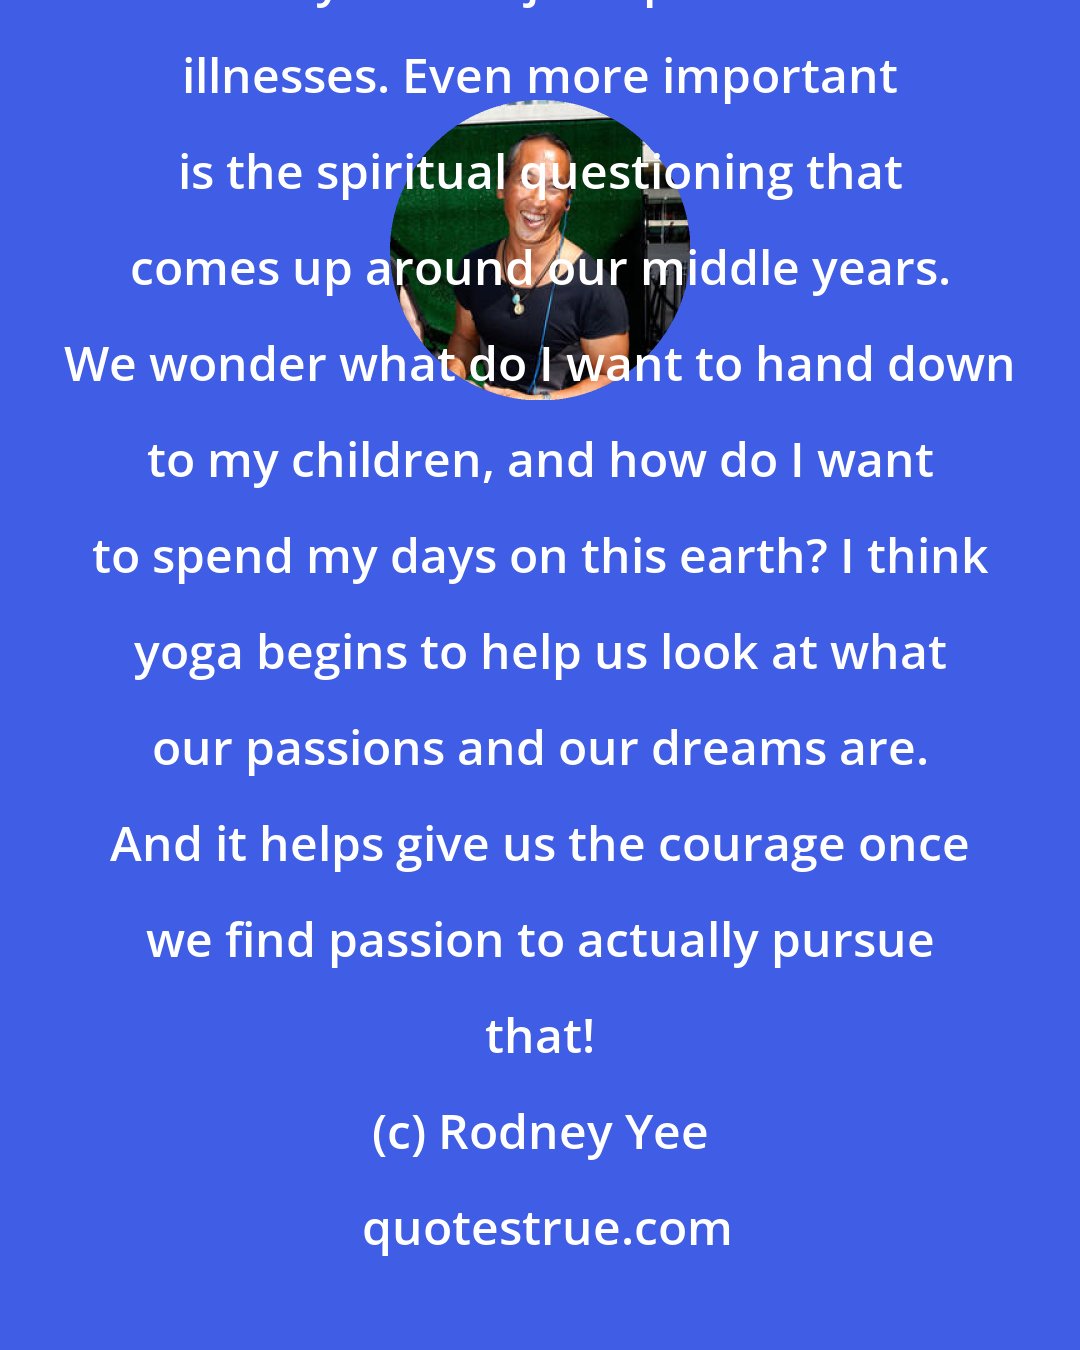 Rodney Yee: Yoga answers a lot of physical problems such as back pain, stress issues, and any kind of joint problems or illnesses. Even more important is the spiritual questioning that comes up around our middle years. We wonder what do I want to hand down to my children, and how do I want to spend my days on this earth? I think yoga begins to help us look at what our passions and our dreams are. And it helps give us the courage once we find passion to actually pursue that!